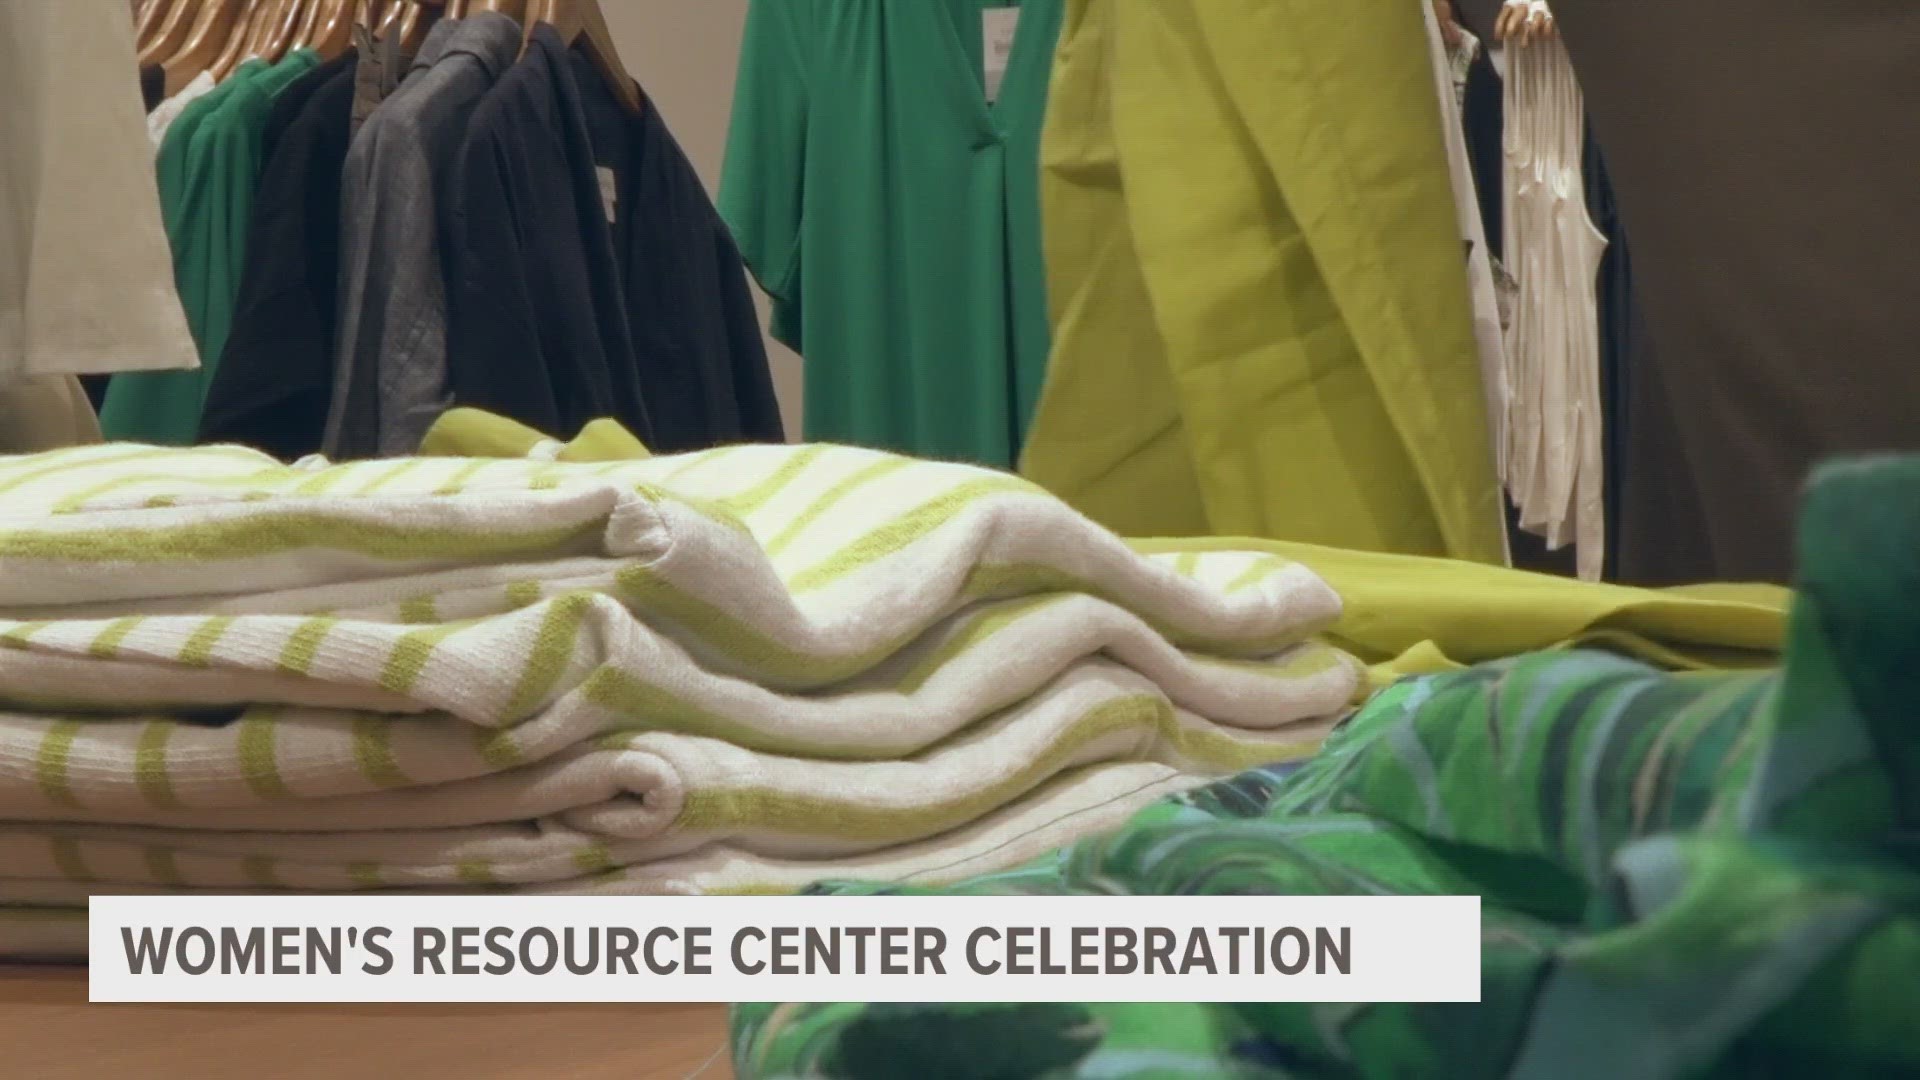 The Women's Resource Center in Grand Rapids is celebrating its 50th anniversary with $35,000 worth of new clothes donations from Woodland Mall stores.